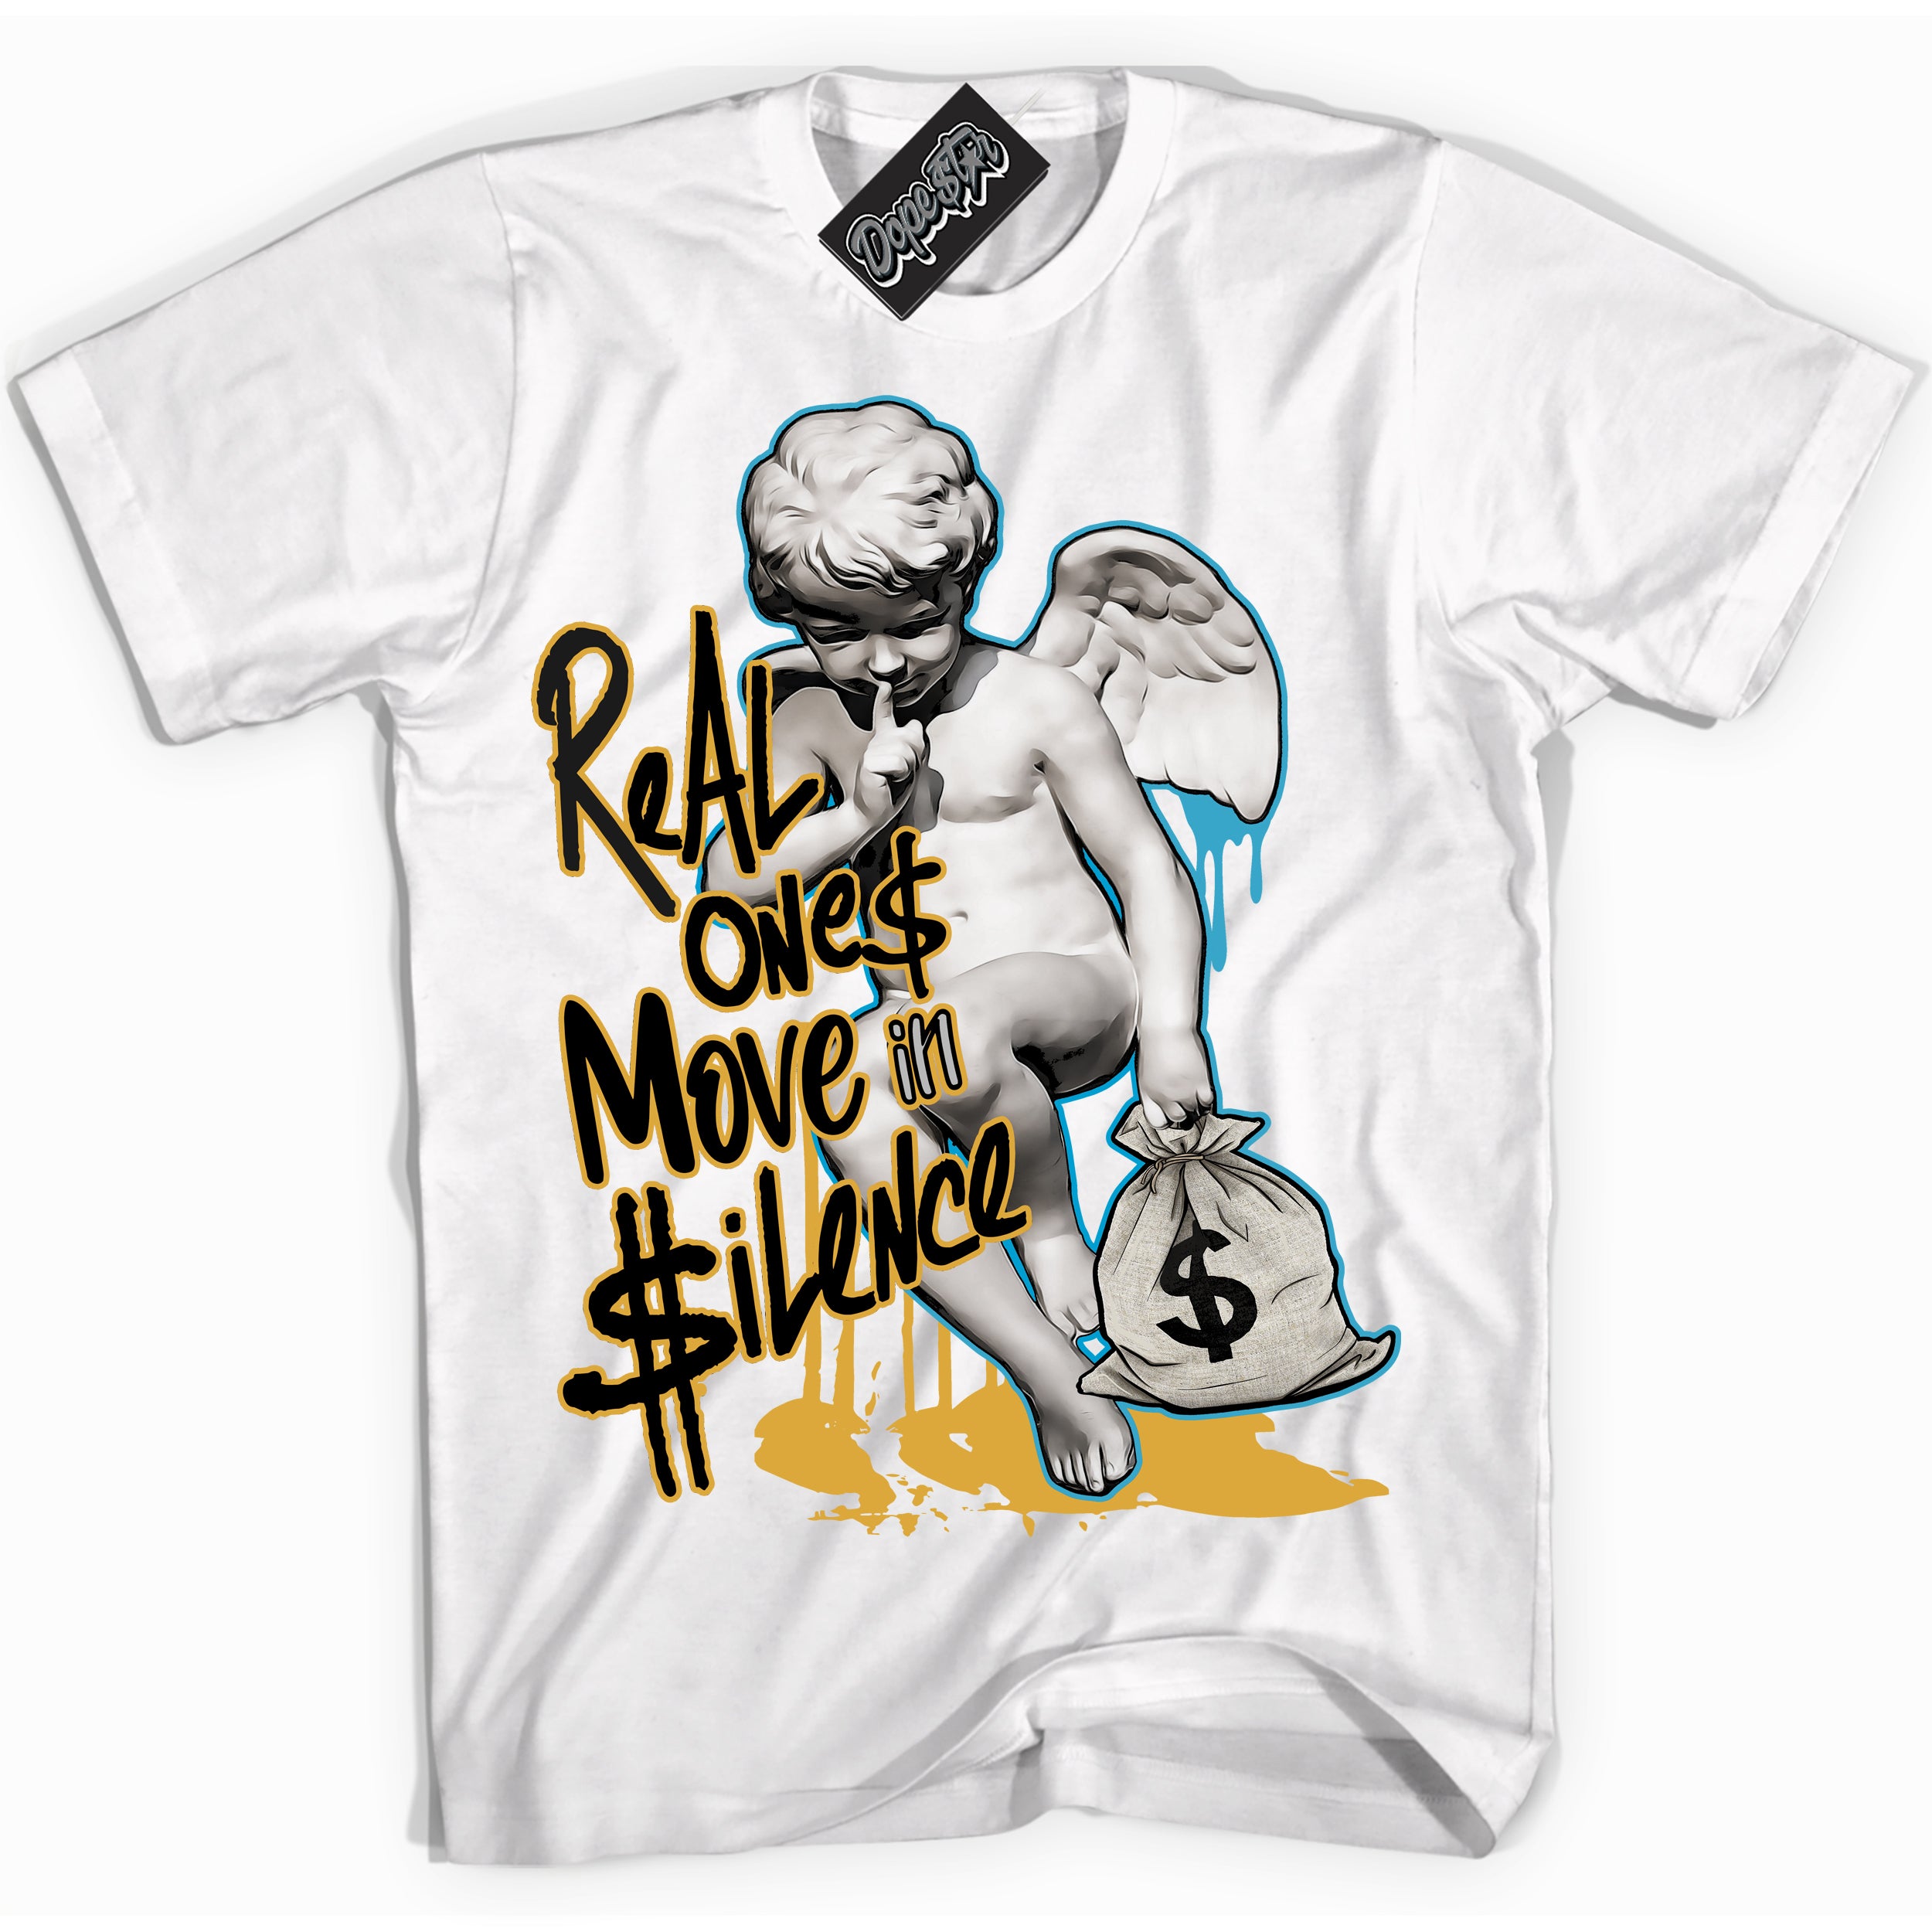 Cool White Shirt with “ Real Ones Cherub” design that perfectly matches Aqua 5s Sneakers.